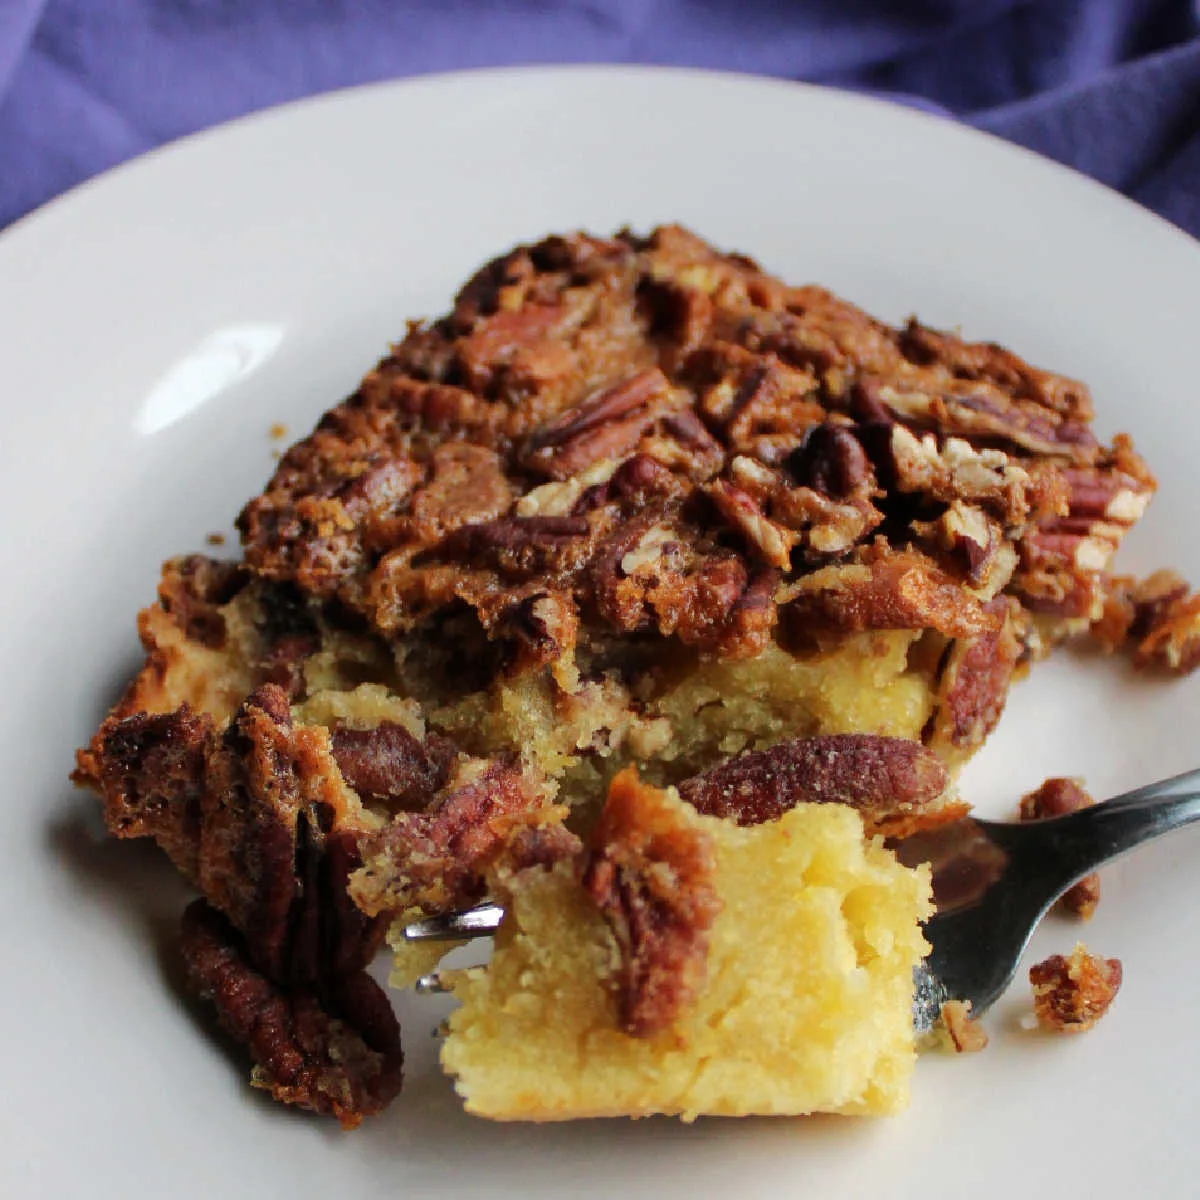 Bite of pecan pudding cake on fork showing dense texture of the cake layer topped with pecans and a crackly top.